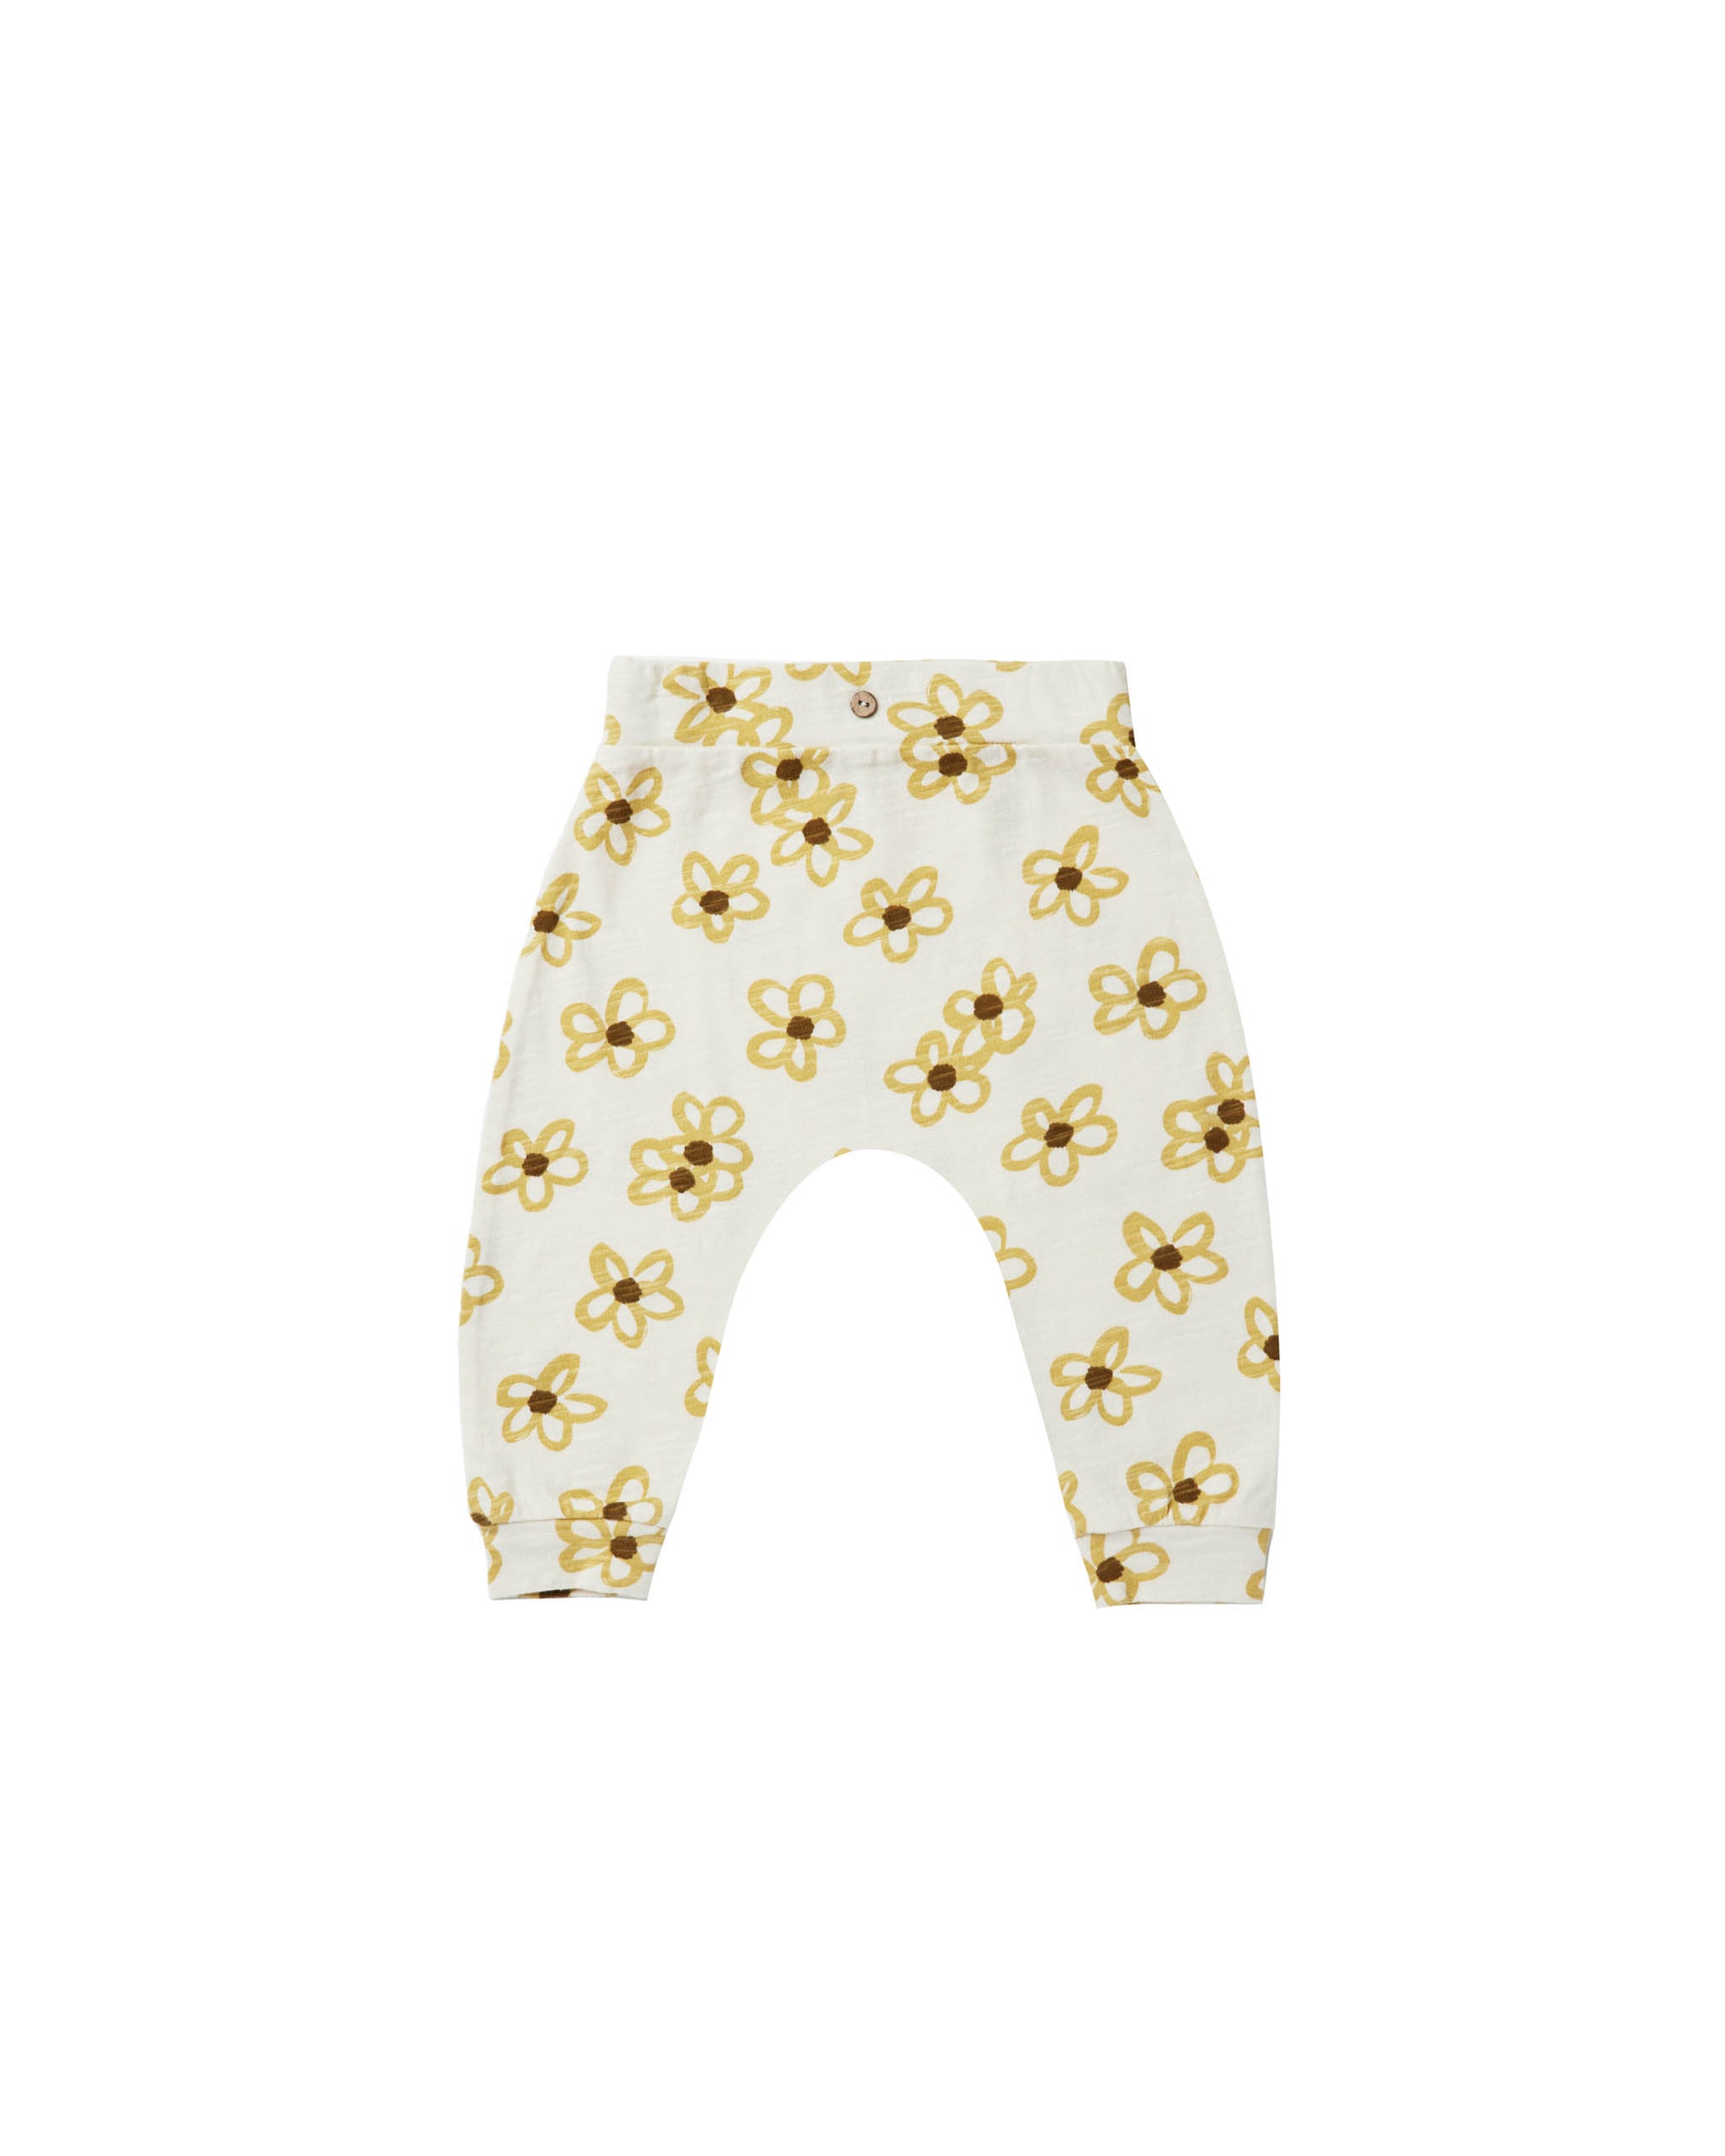 RYLEE + CRU SLOUCH PANT / DAISY